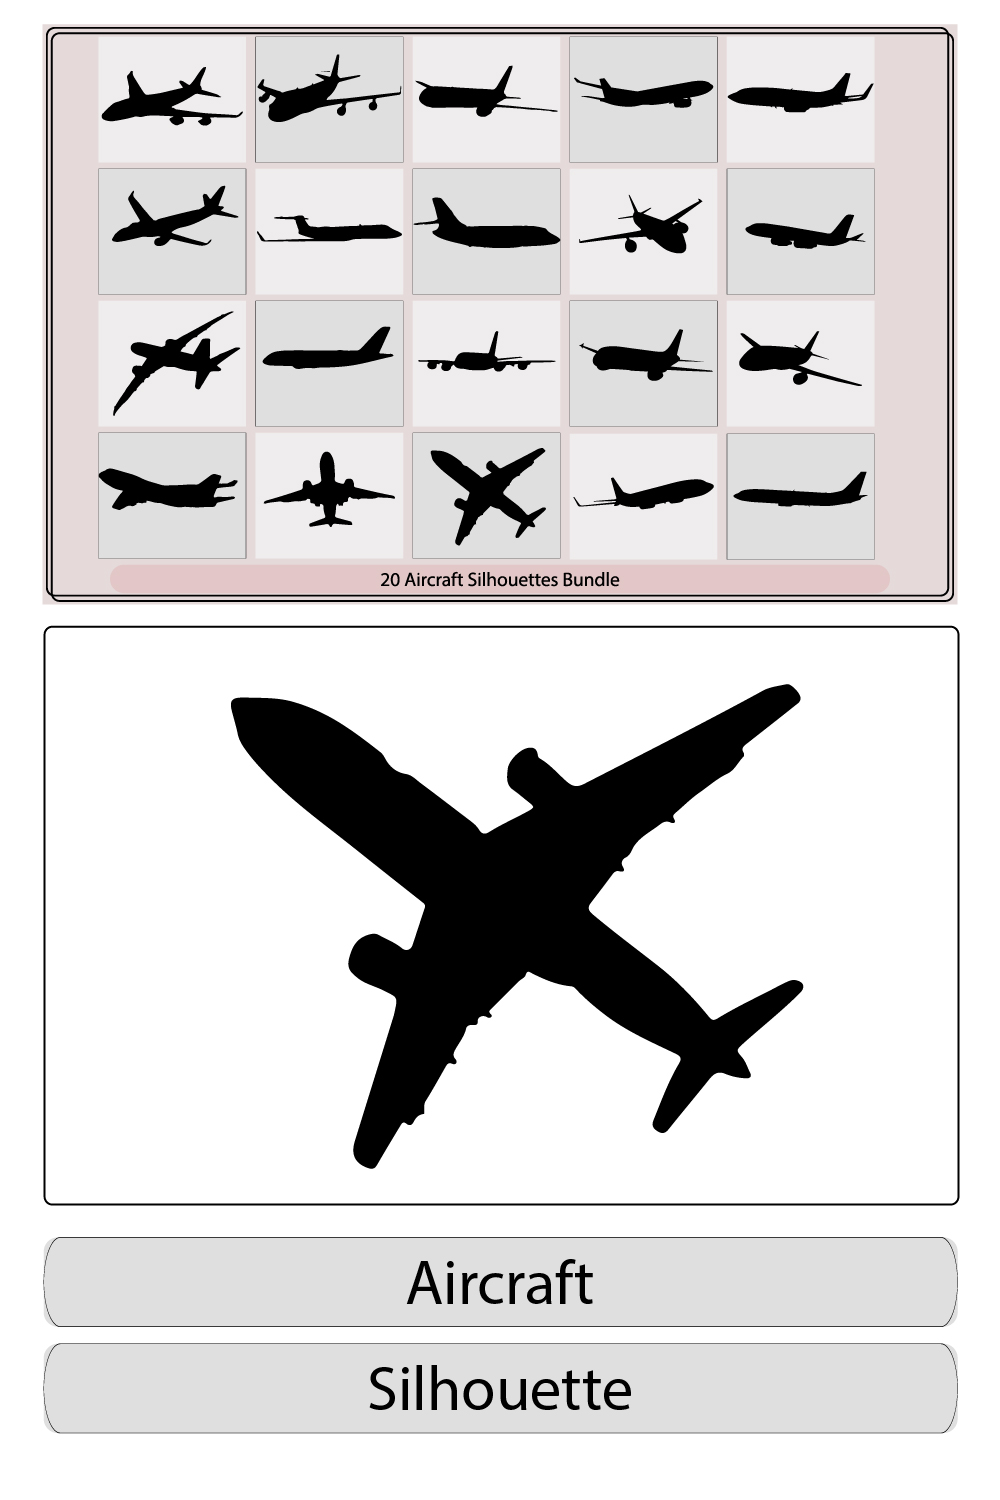 Silhouette of airplane shadow,Military aircrafts icon set,Fighter jet aircraft silhouette vector pinterest preview image.